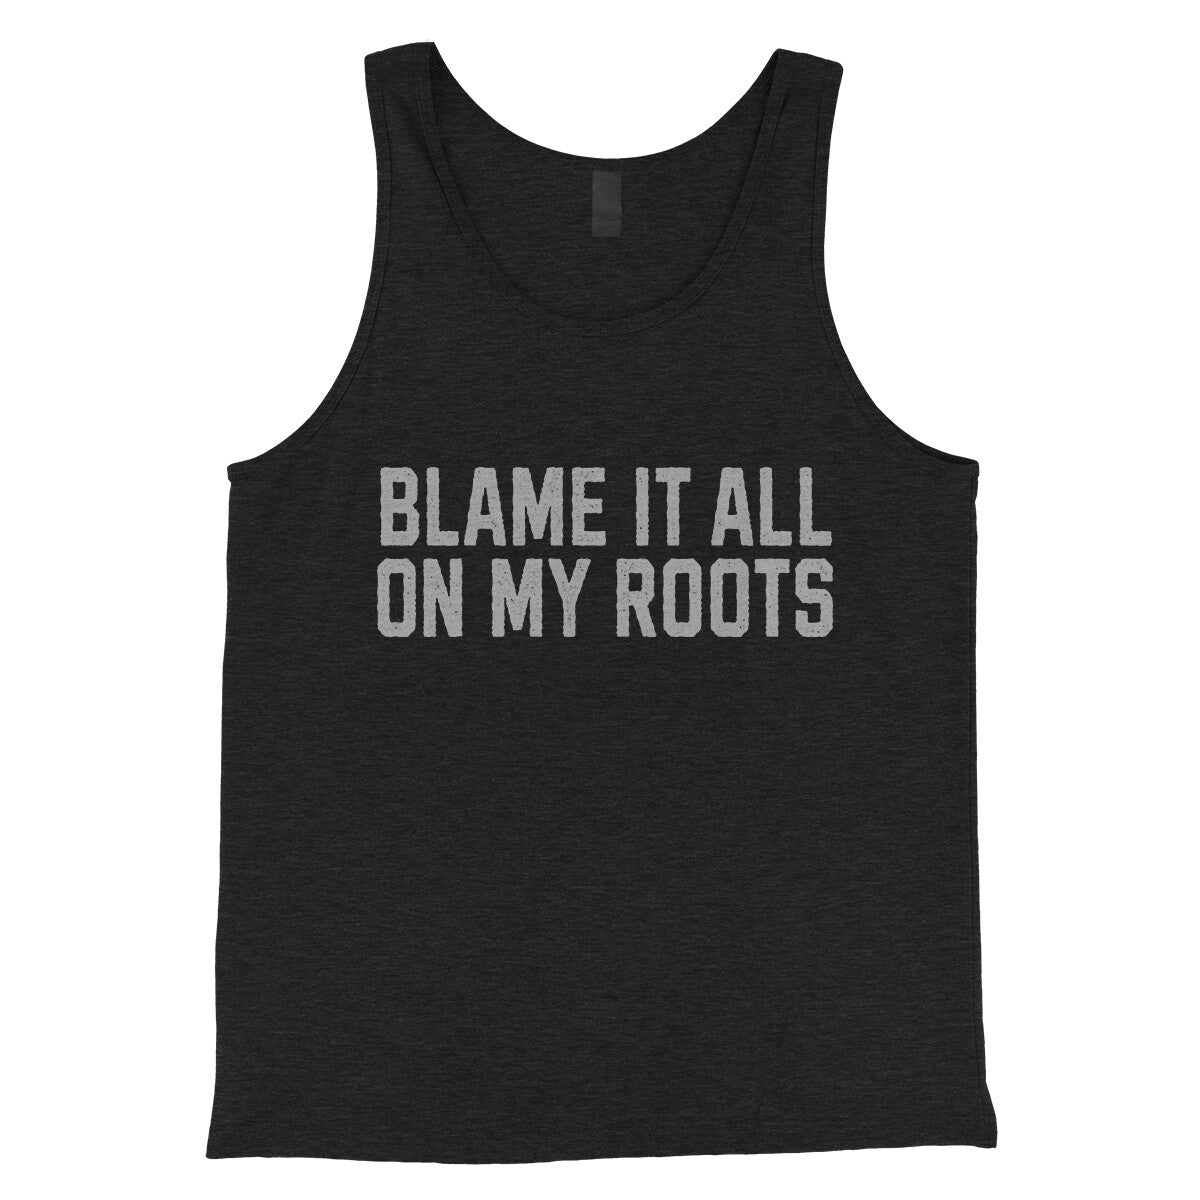 Blame it All on my Roots in Charcoal Black TriBlend Color